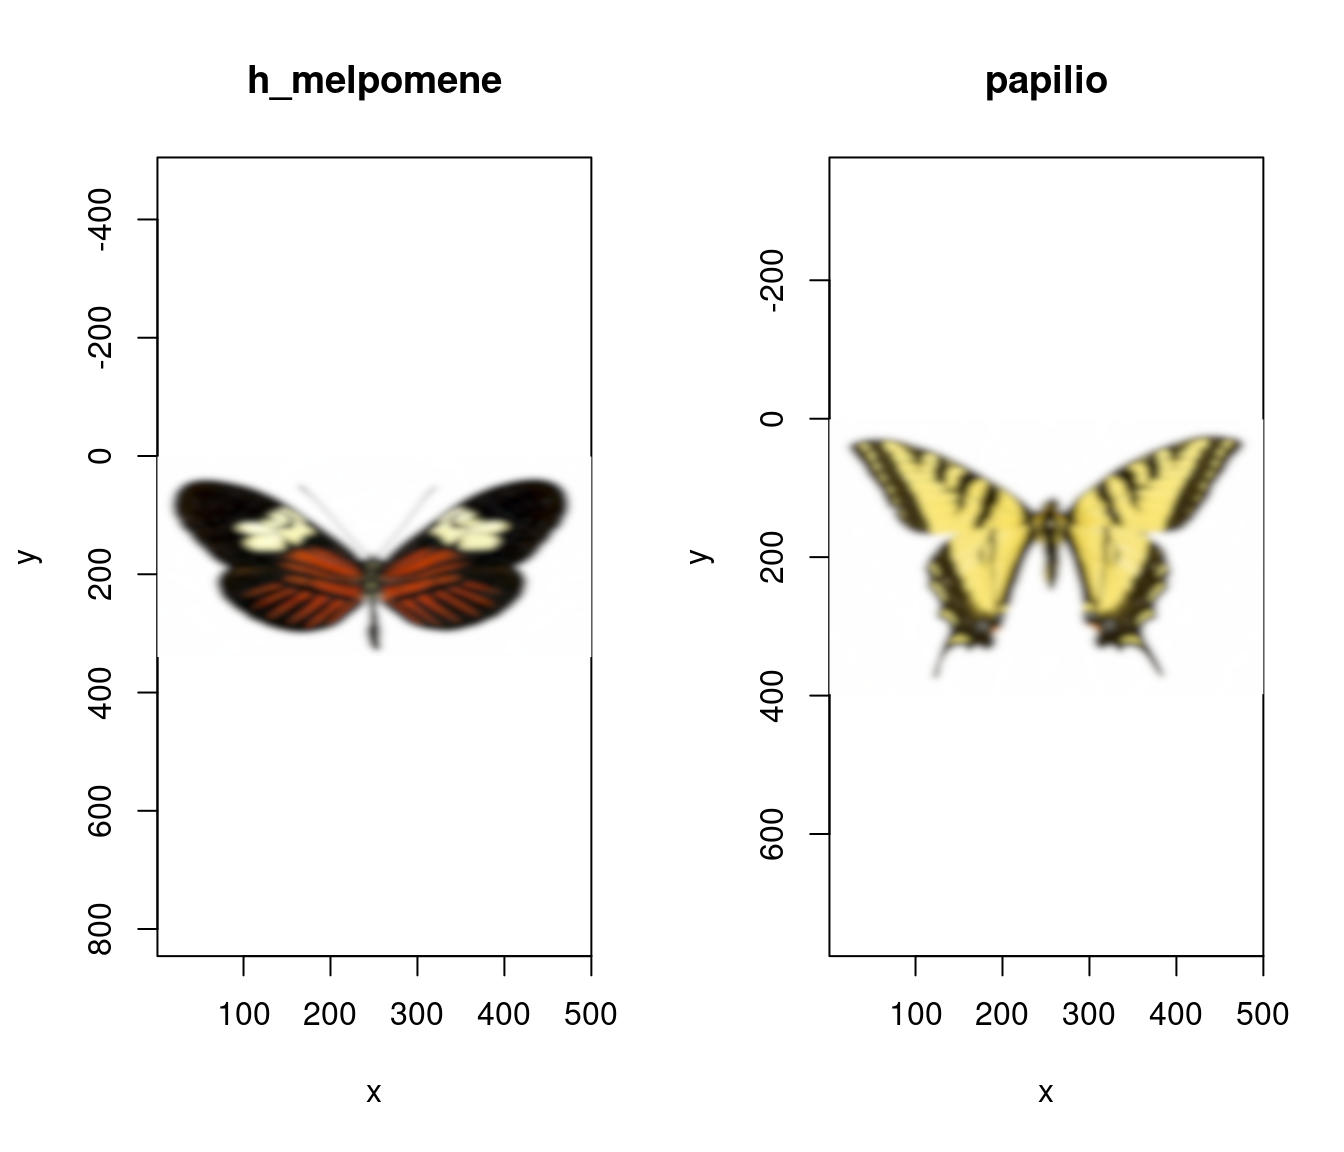 Images of our butterflies after modelling for the acuity of a conspecific viewer